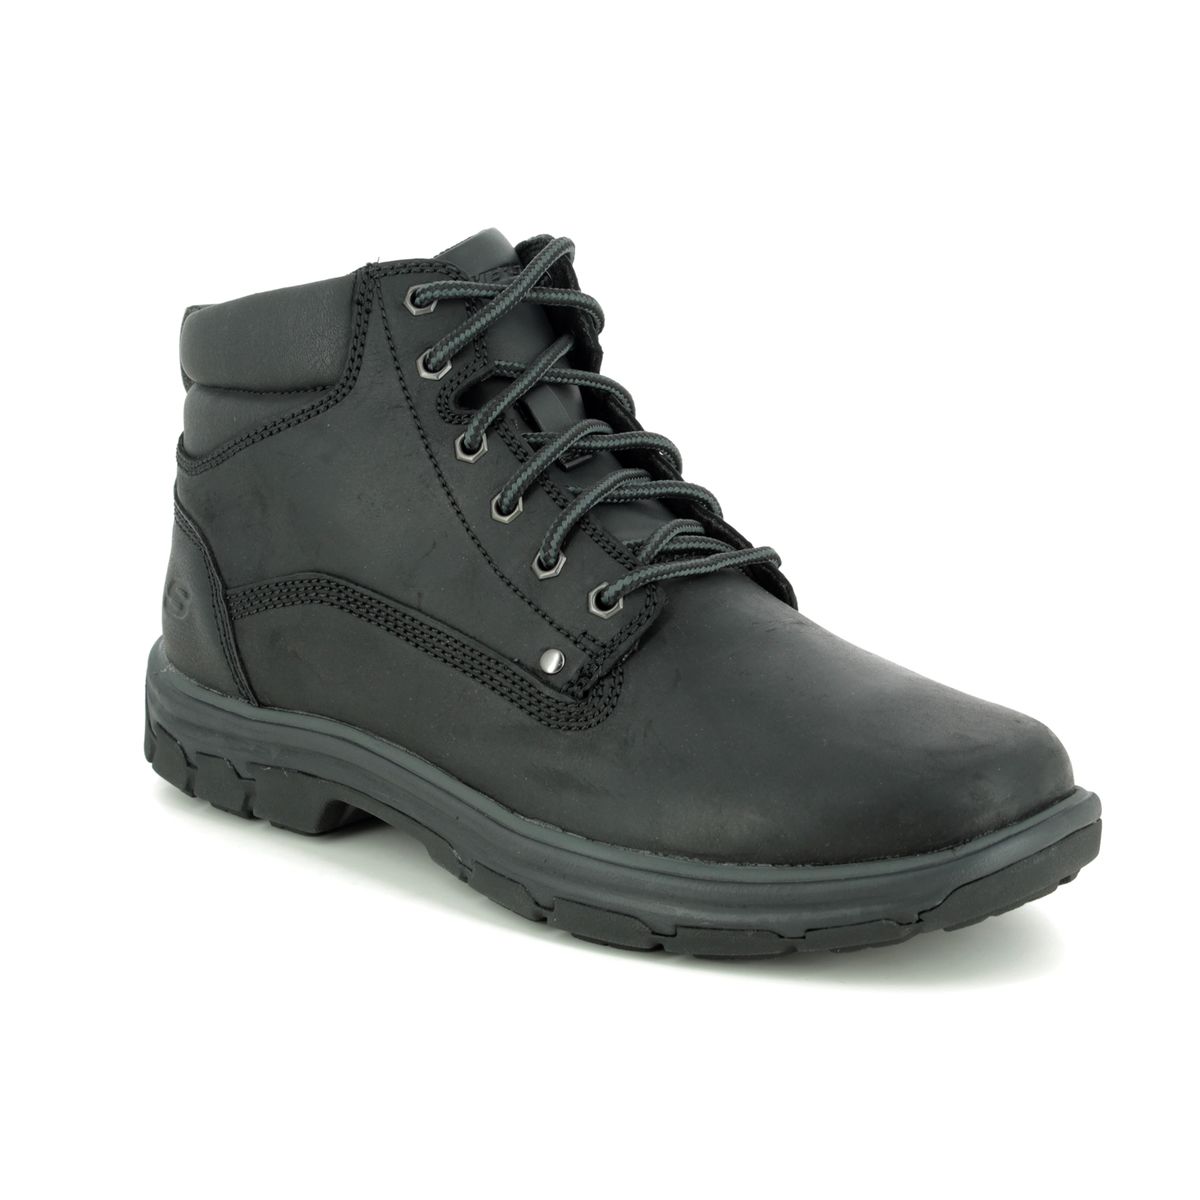 leather sketcher boots